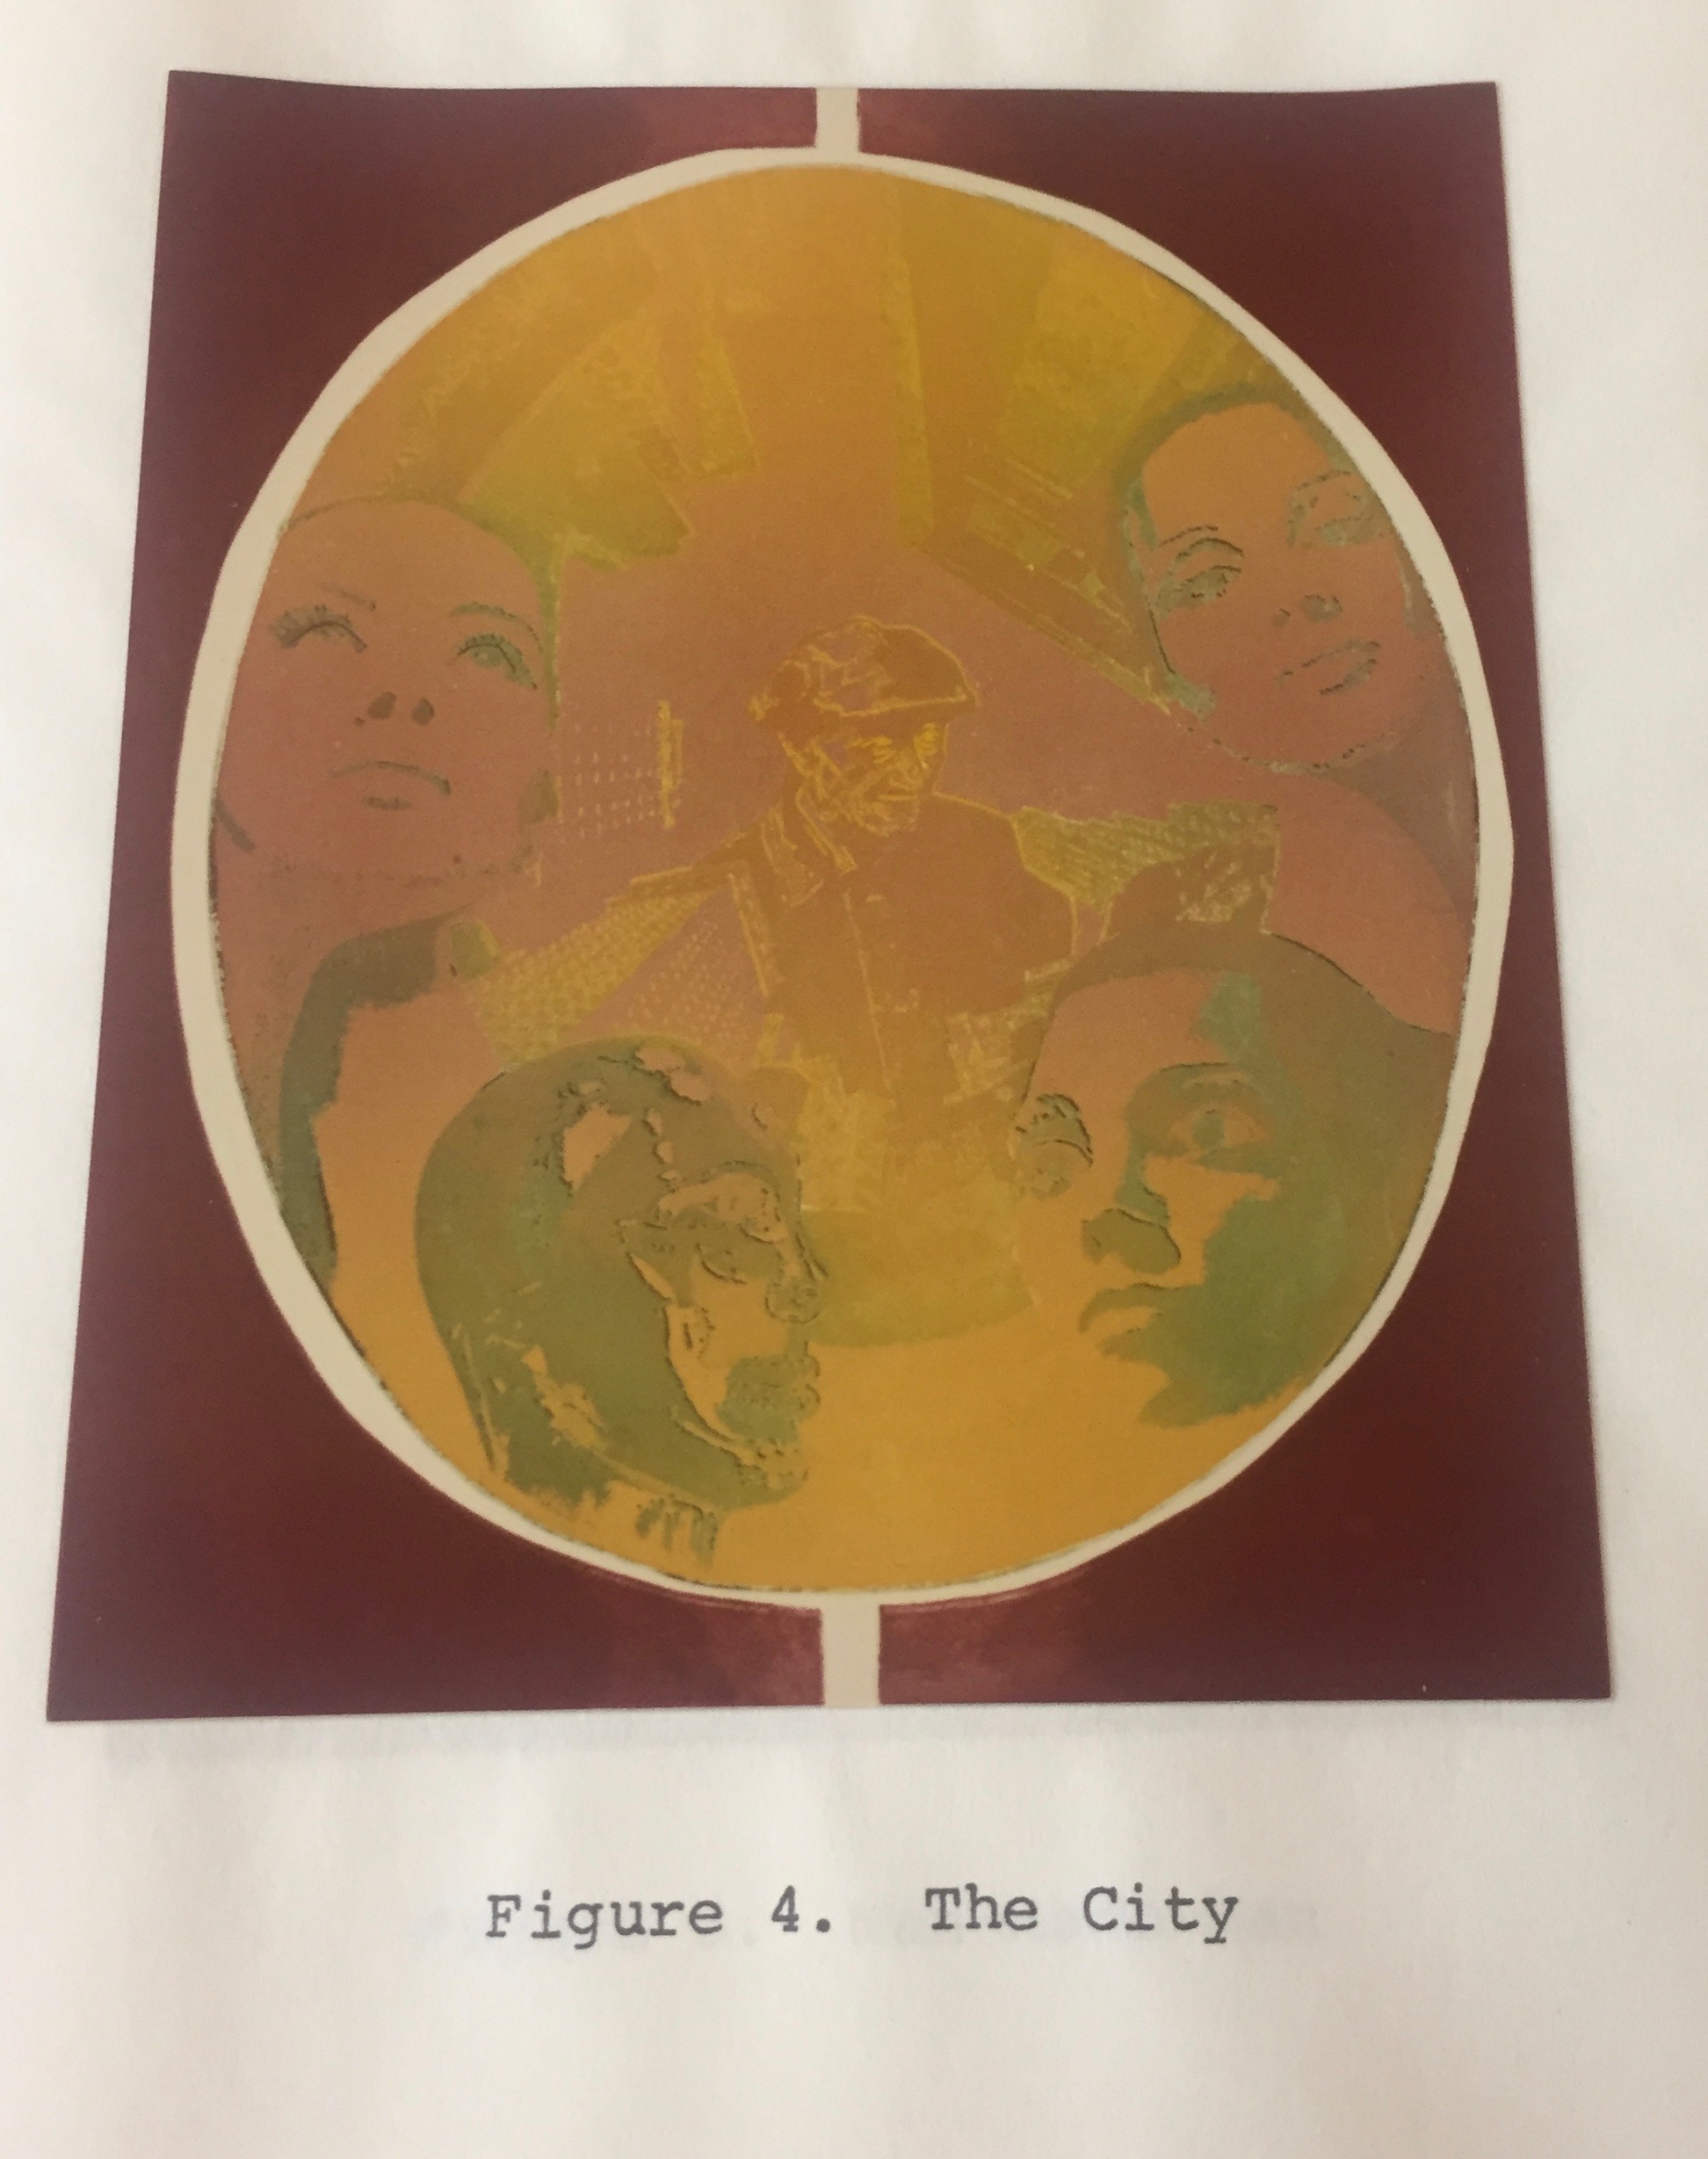 Valeerat Burapavong. “The City” 1975. The faces of magazine models peer through a golden circle surrounded by a red square shape. Below the image are the words "Figure 4. The City." Courtesy of Illinois Institute of Technology, Paul Galvin Library, Special Collections.